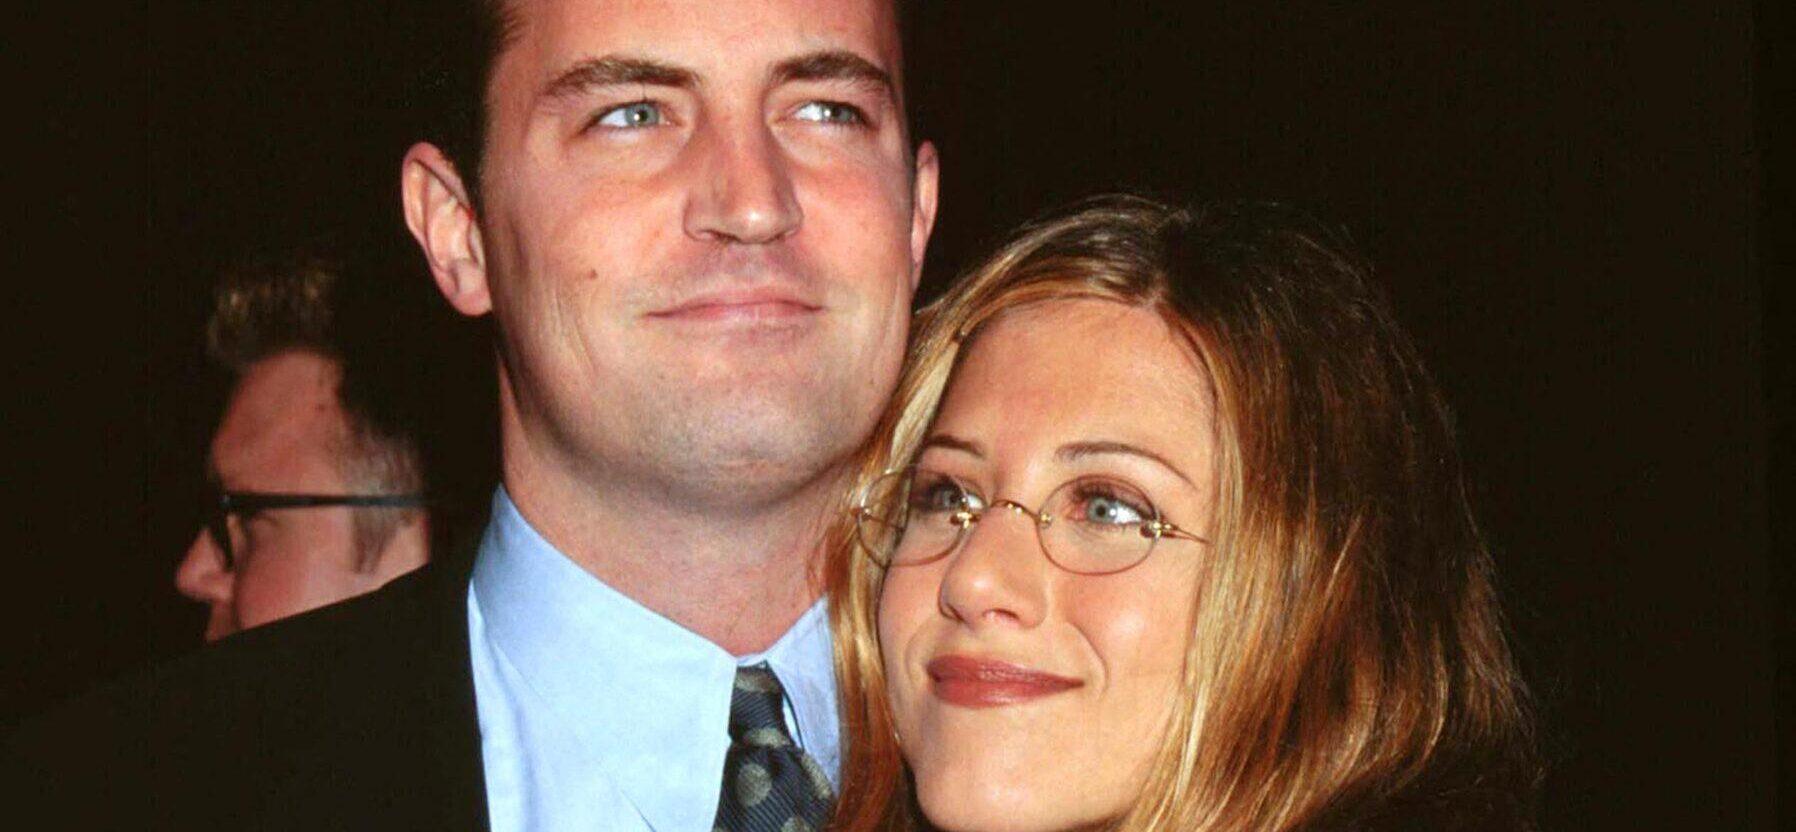 Jennifer Aniston Shares Special Text From Matthew Perry In Statement